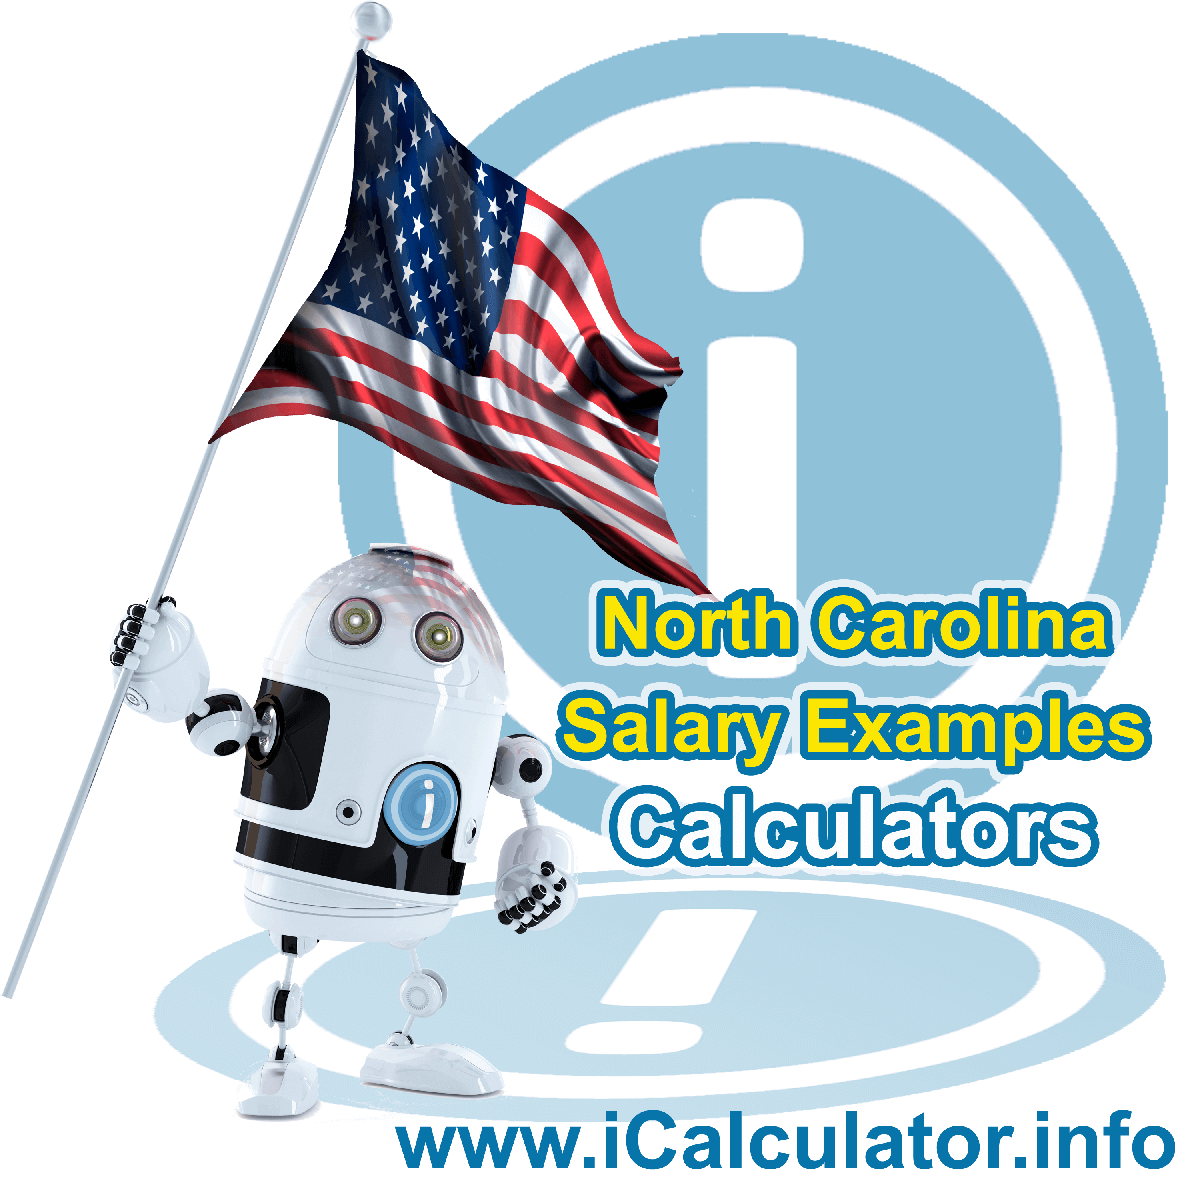 North Carolina Salary Example for $ 125,000.00 in 2023 | iCalculator™ | $ 125,000.00 salary example for employee and employer paying North Carolina State tincome taxes. Detailed salary after tax calculation including North Carolina State Tax, Federal State Tax, Medicare Deductions, Social Security, Capital Gains and other income tax and salary deductions complete with supporting North Carolina state tax tables 